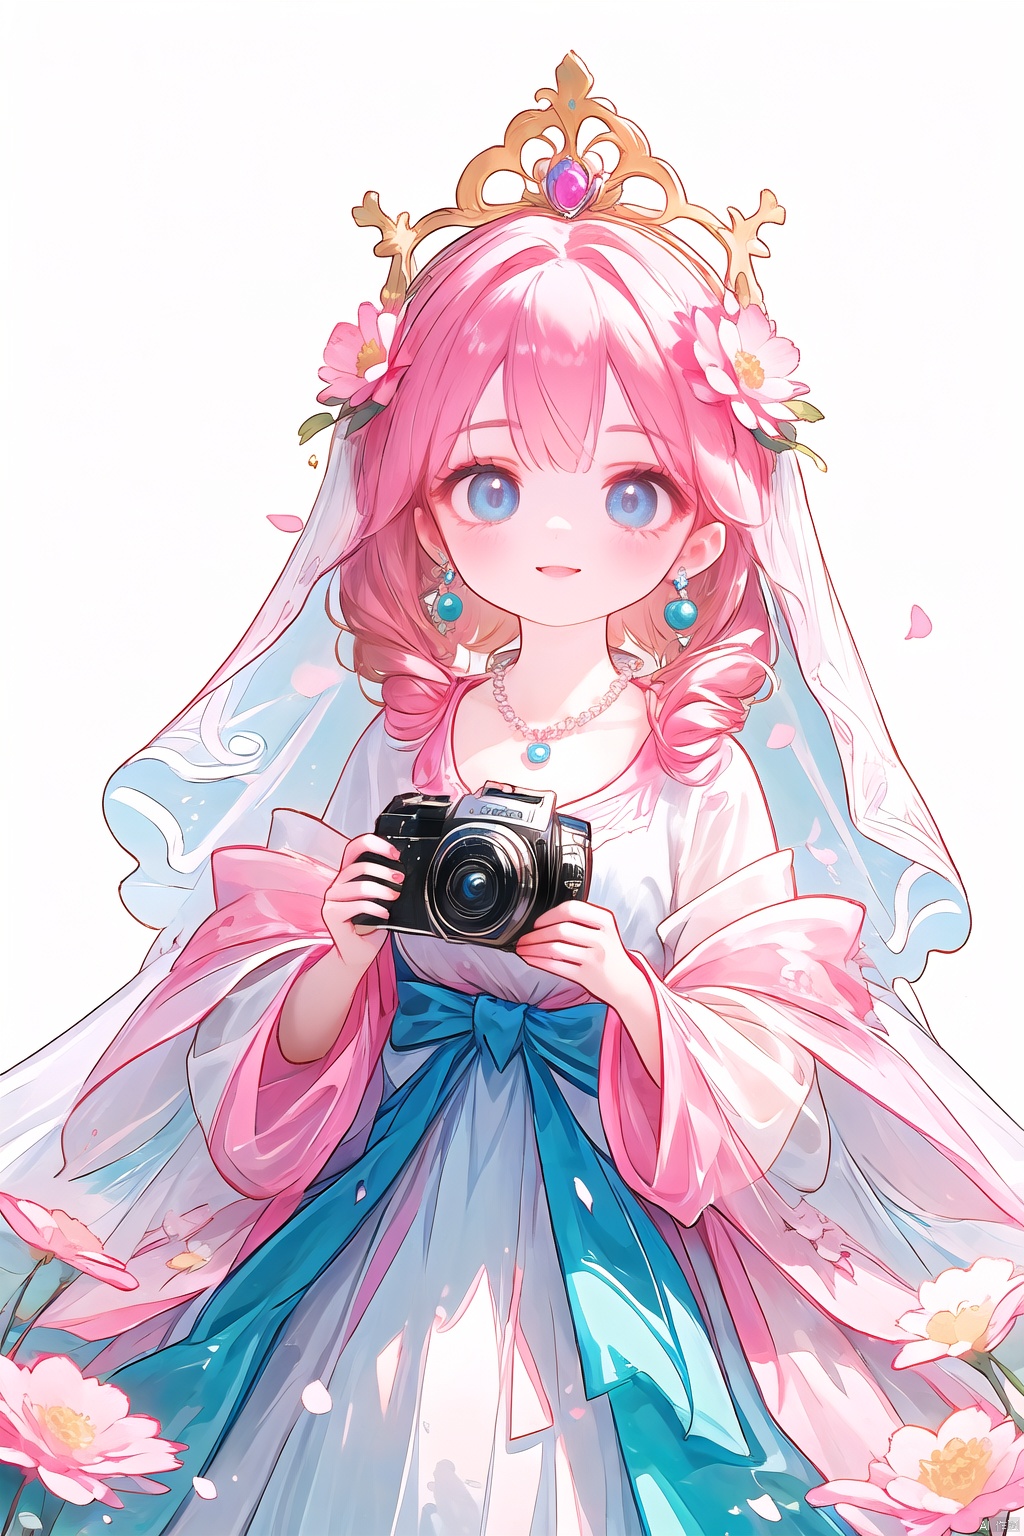  Golden micro-curly hair, exquisite headdress, lovely, pink veil, ((looking at the camera)), flower earrings, pearl necklace, small fresh, blue eyes, eyelashes, sweet smile, holding a bunch of pink flowers, Mori super fairy dream simple pink princess veil.